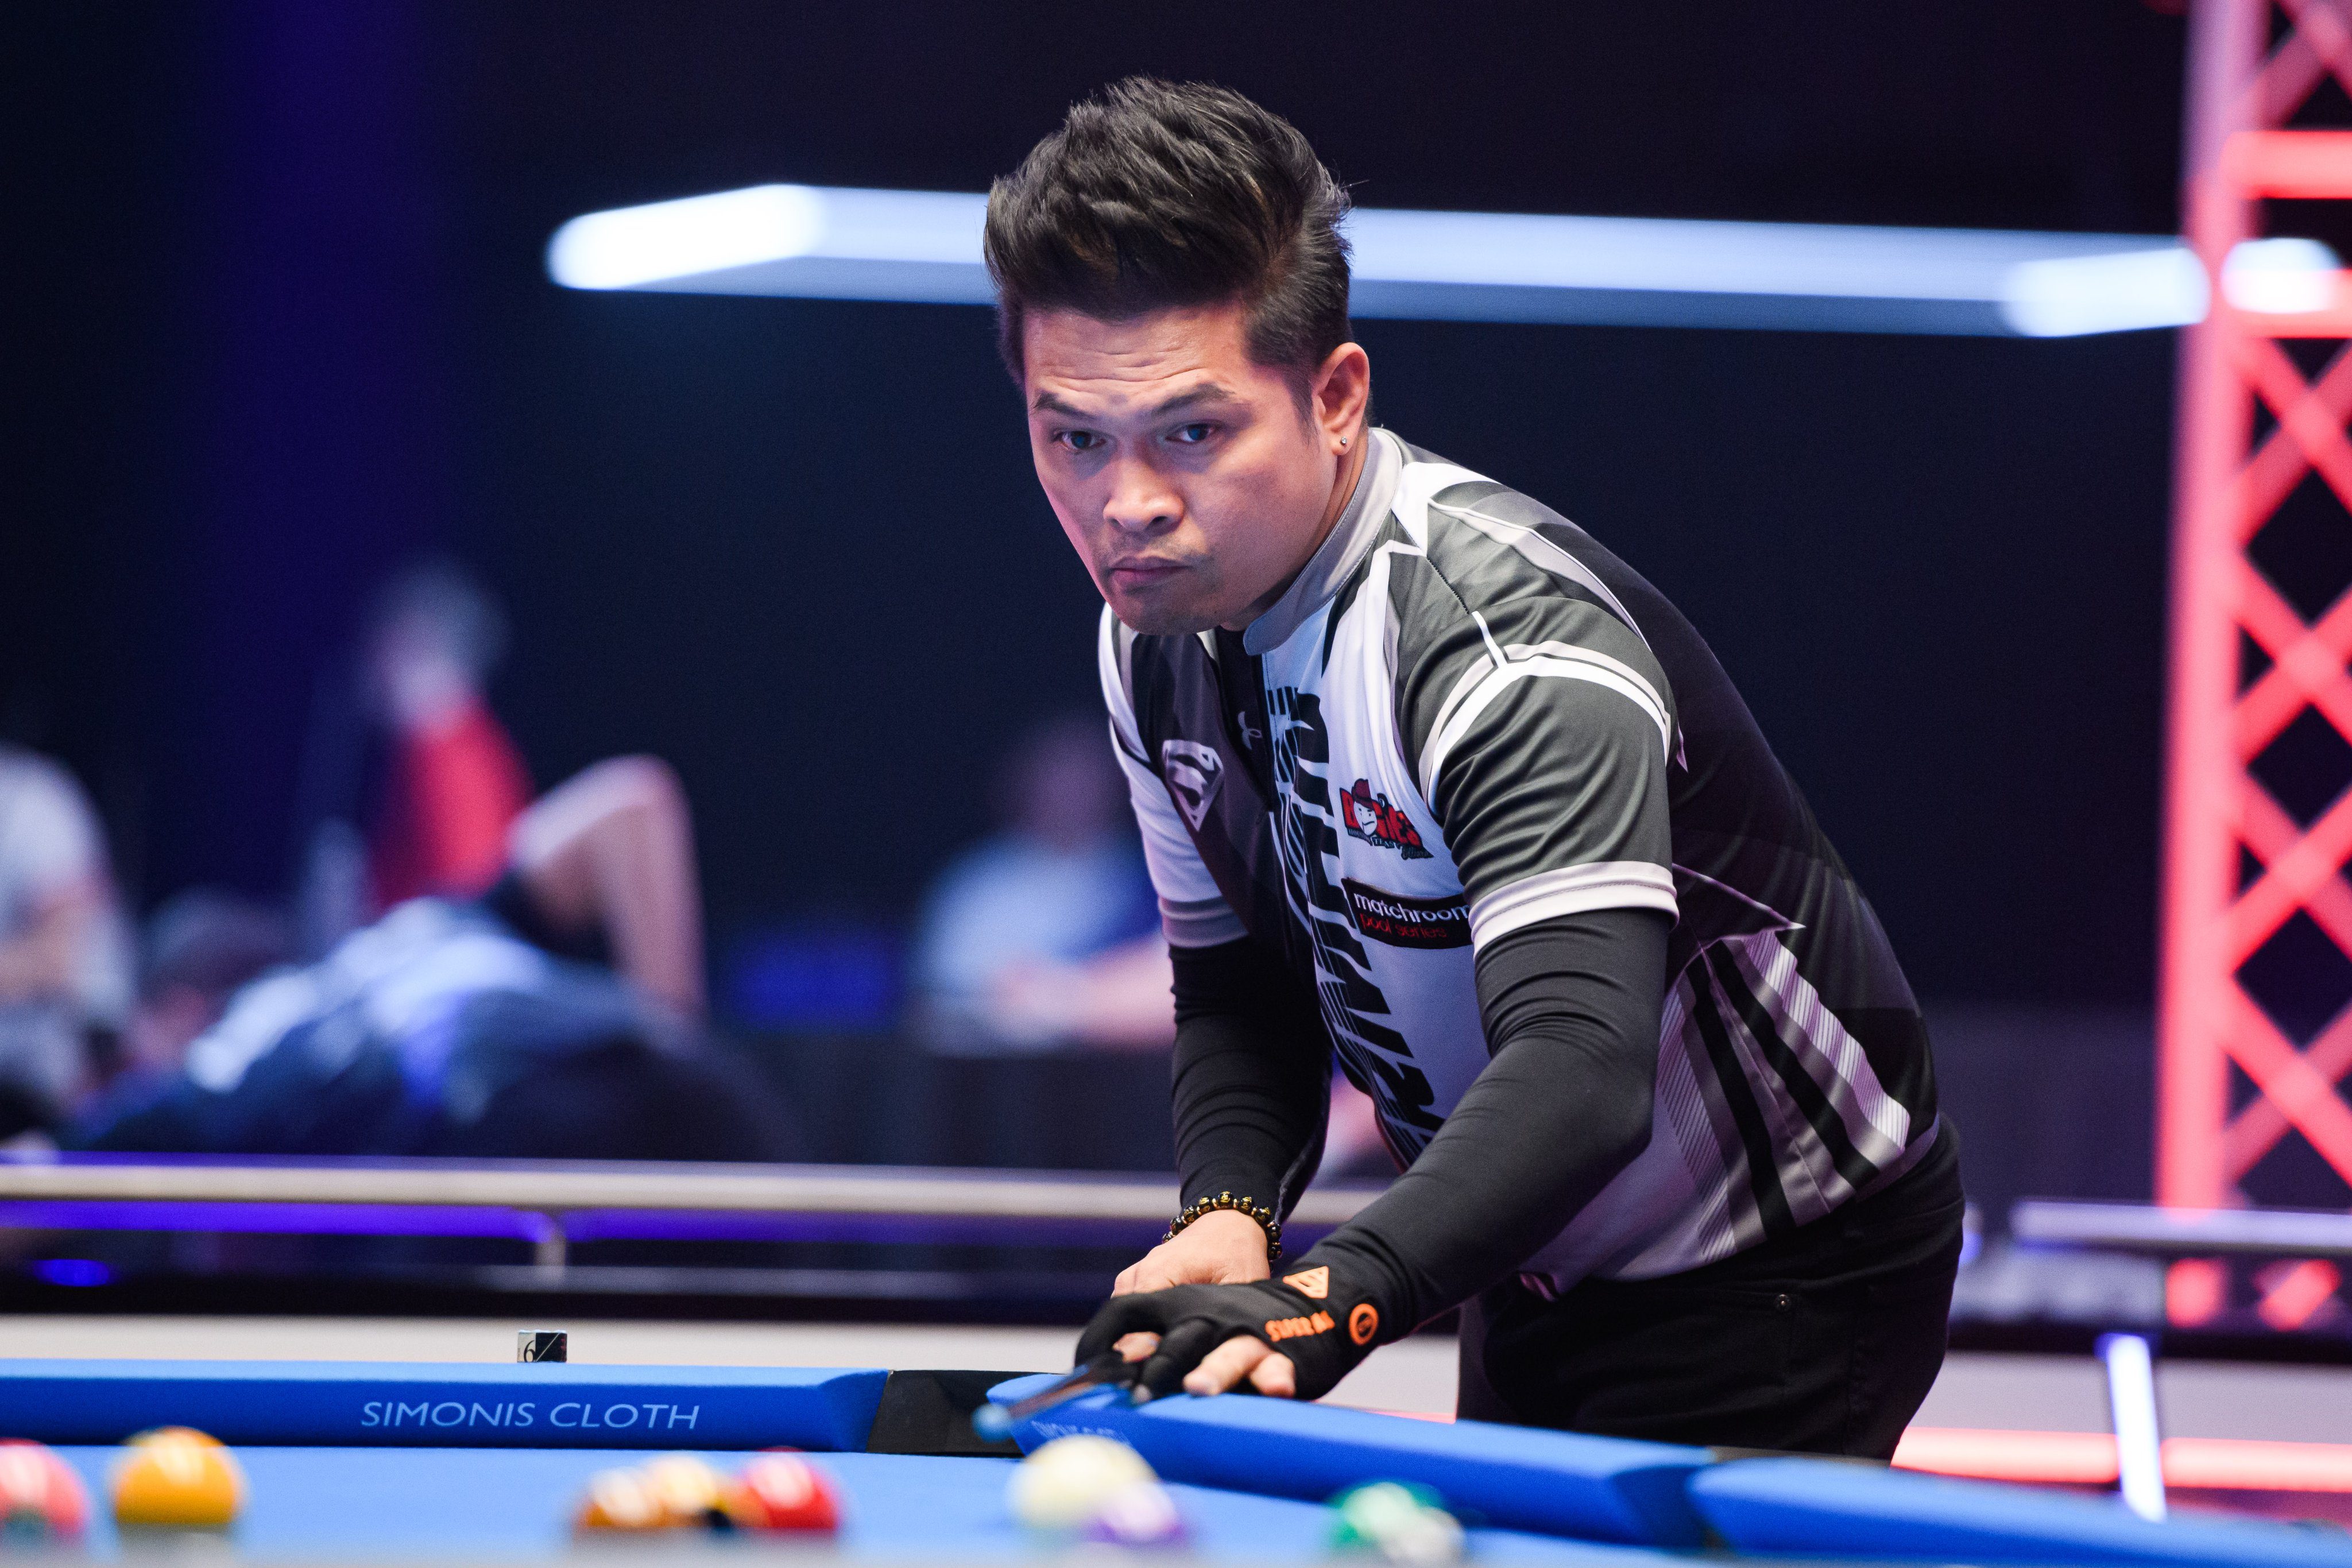 Roberto Gomez bows out of World Pool Championship